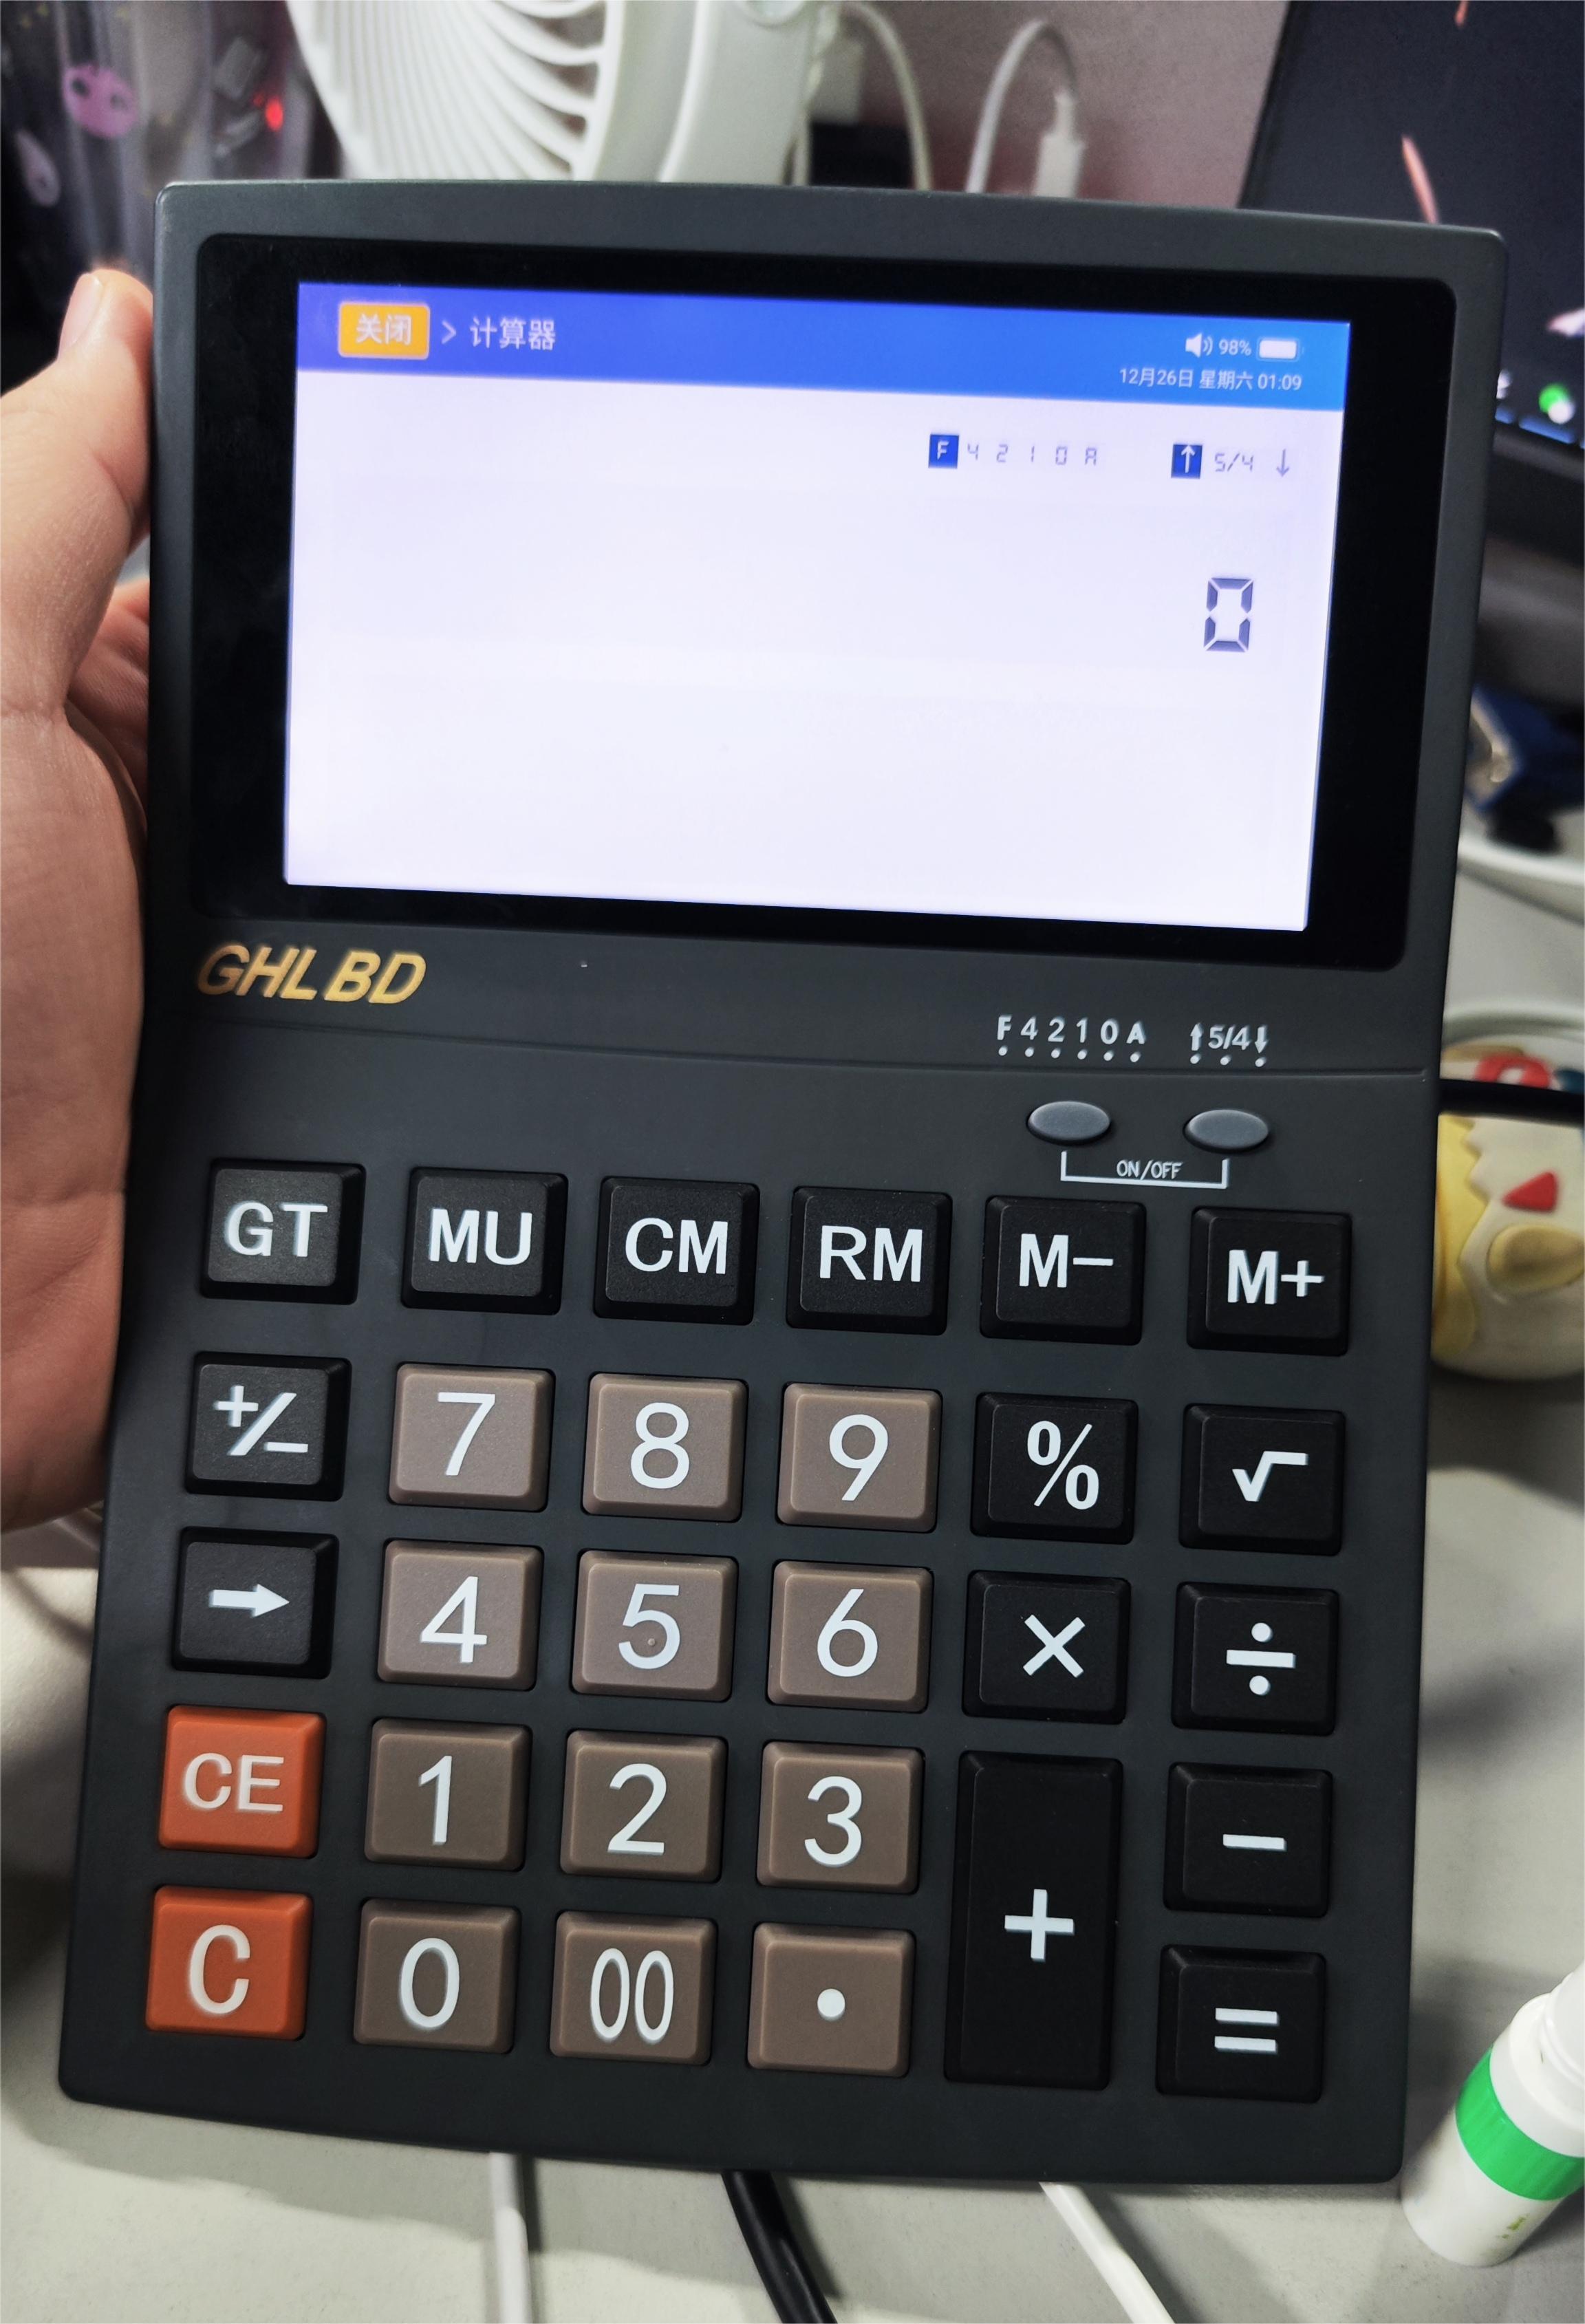 GHLBD Android calculator mini review – An Allwinner A50-based Android 9.0 calculator